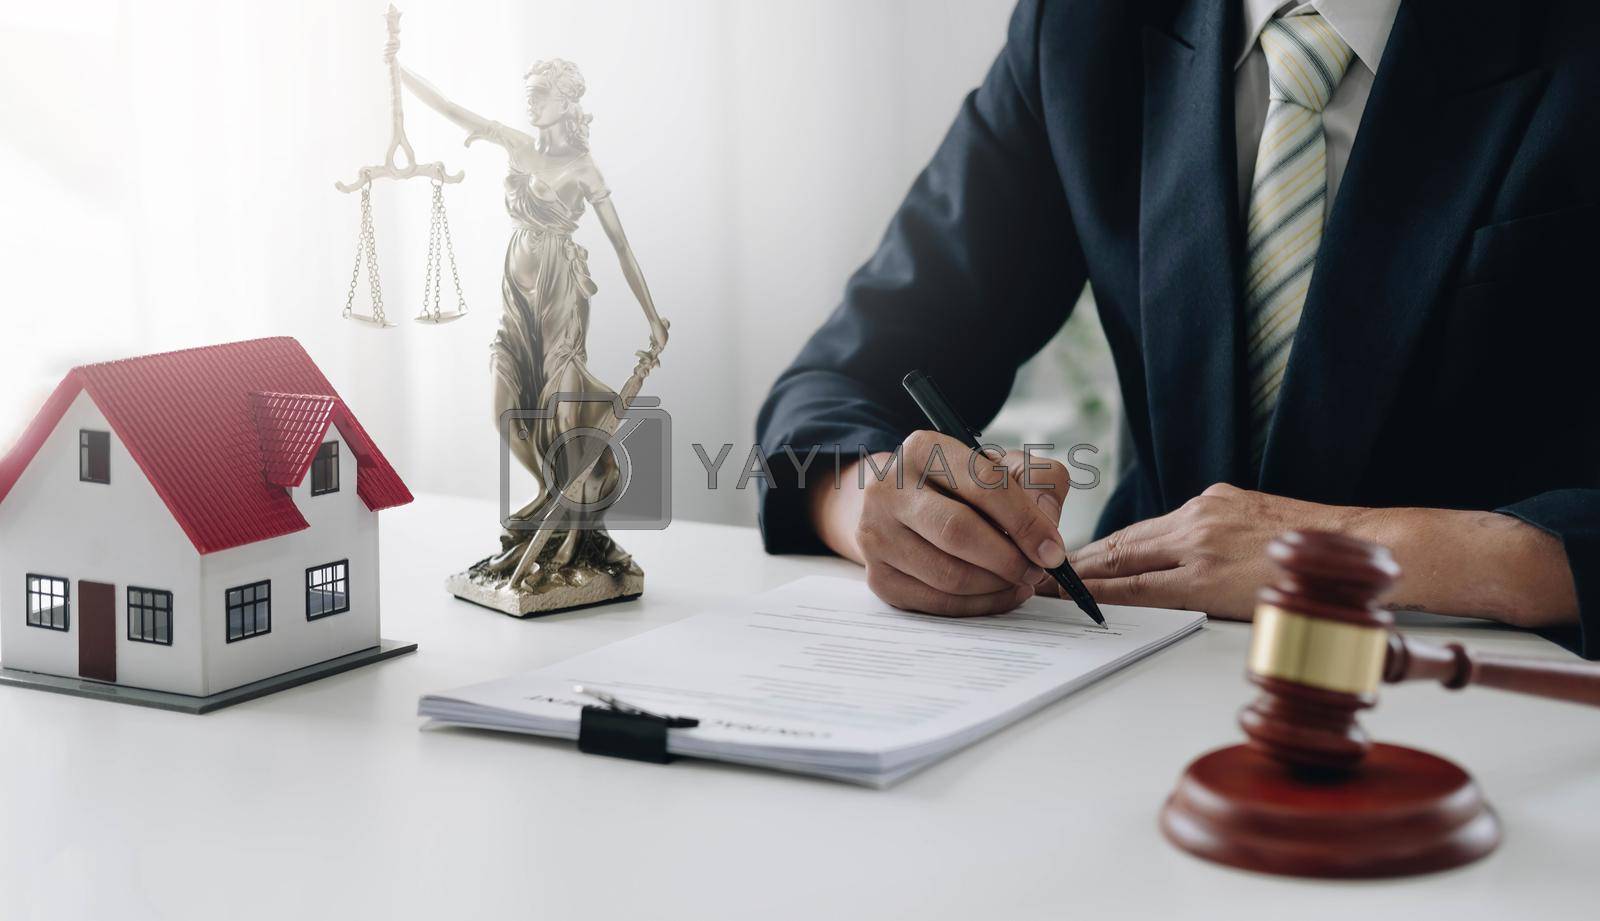 Royalty free image of Judge gavel and house model on the table. Man signing in document. Real Estate Lawyer by wichayada